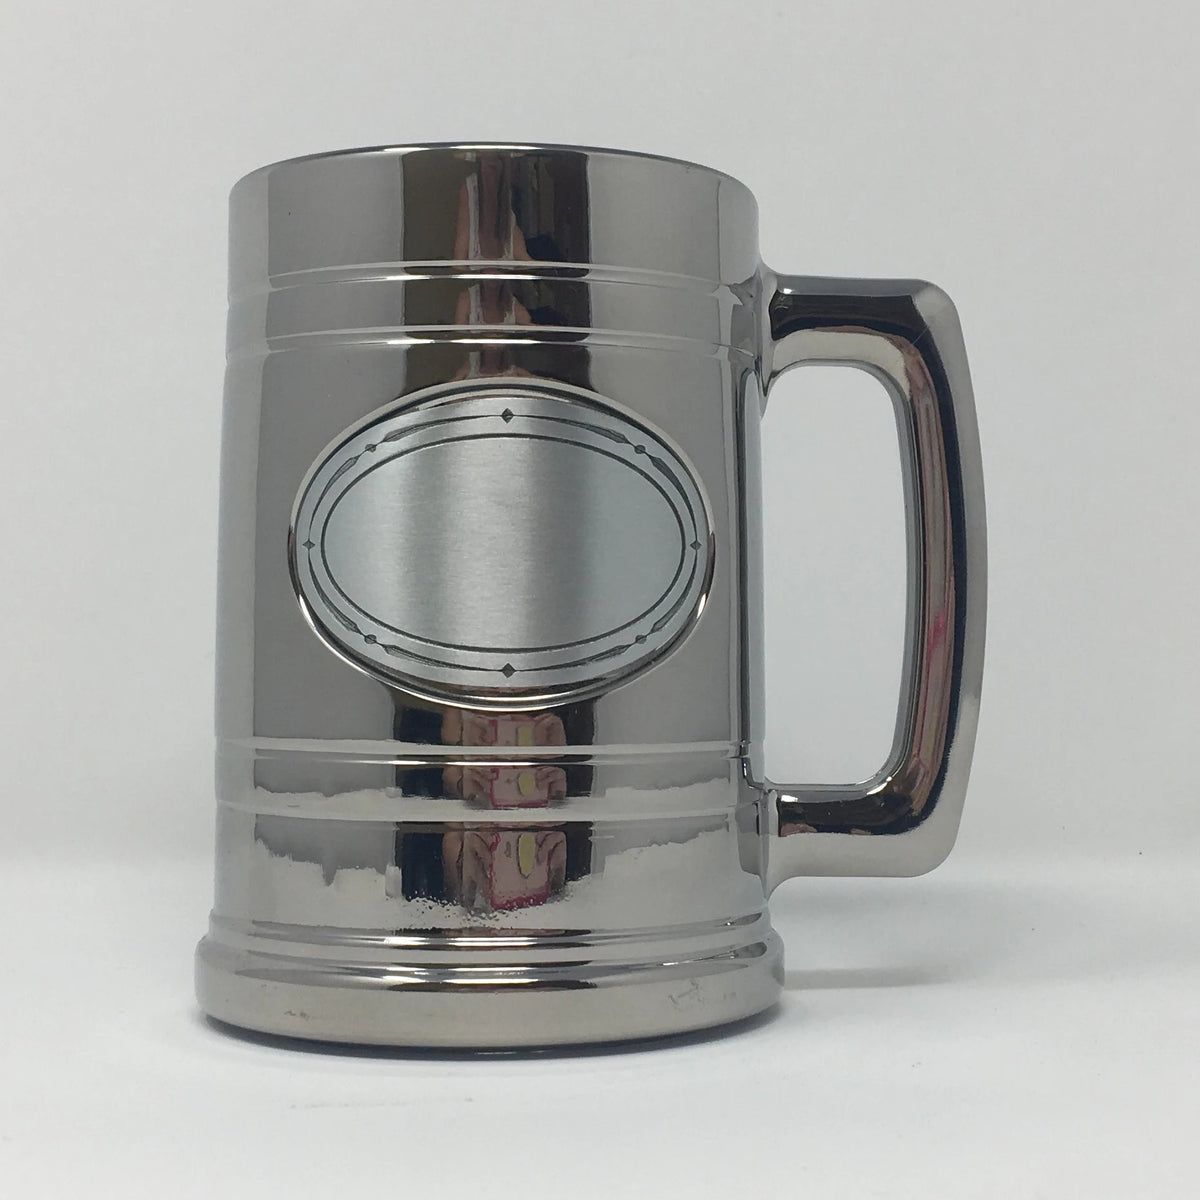 Beer Stein with Metallic Finish